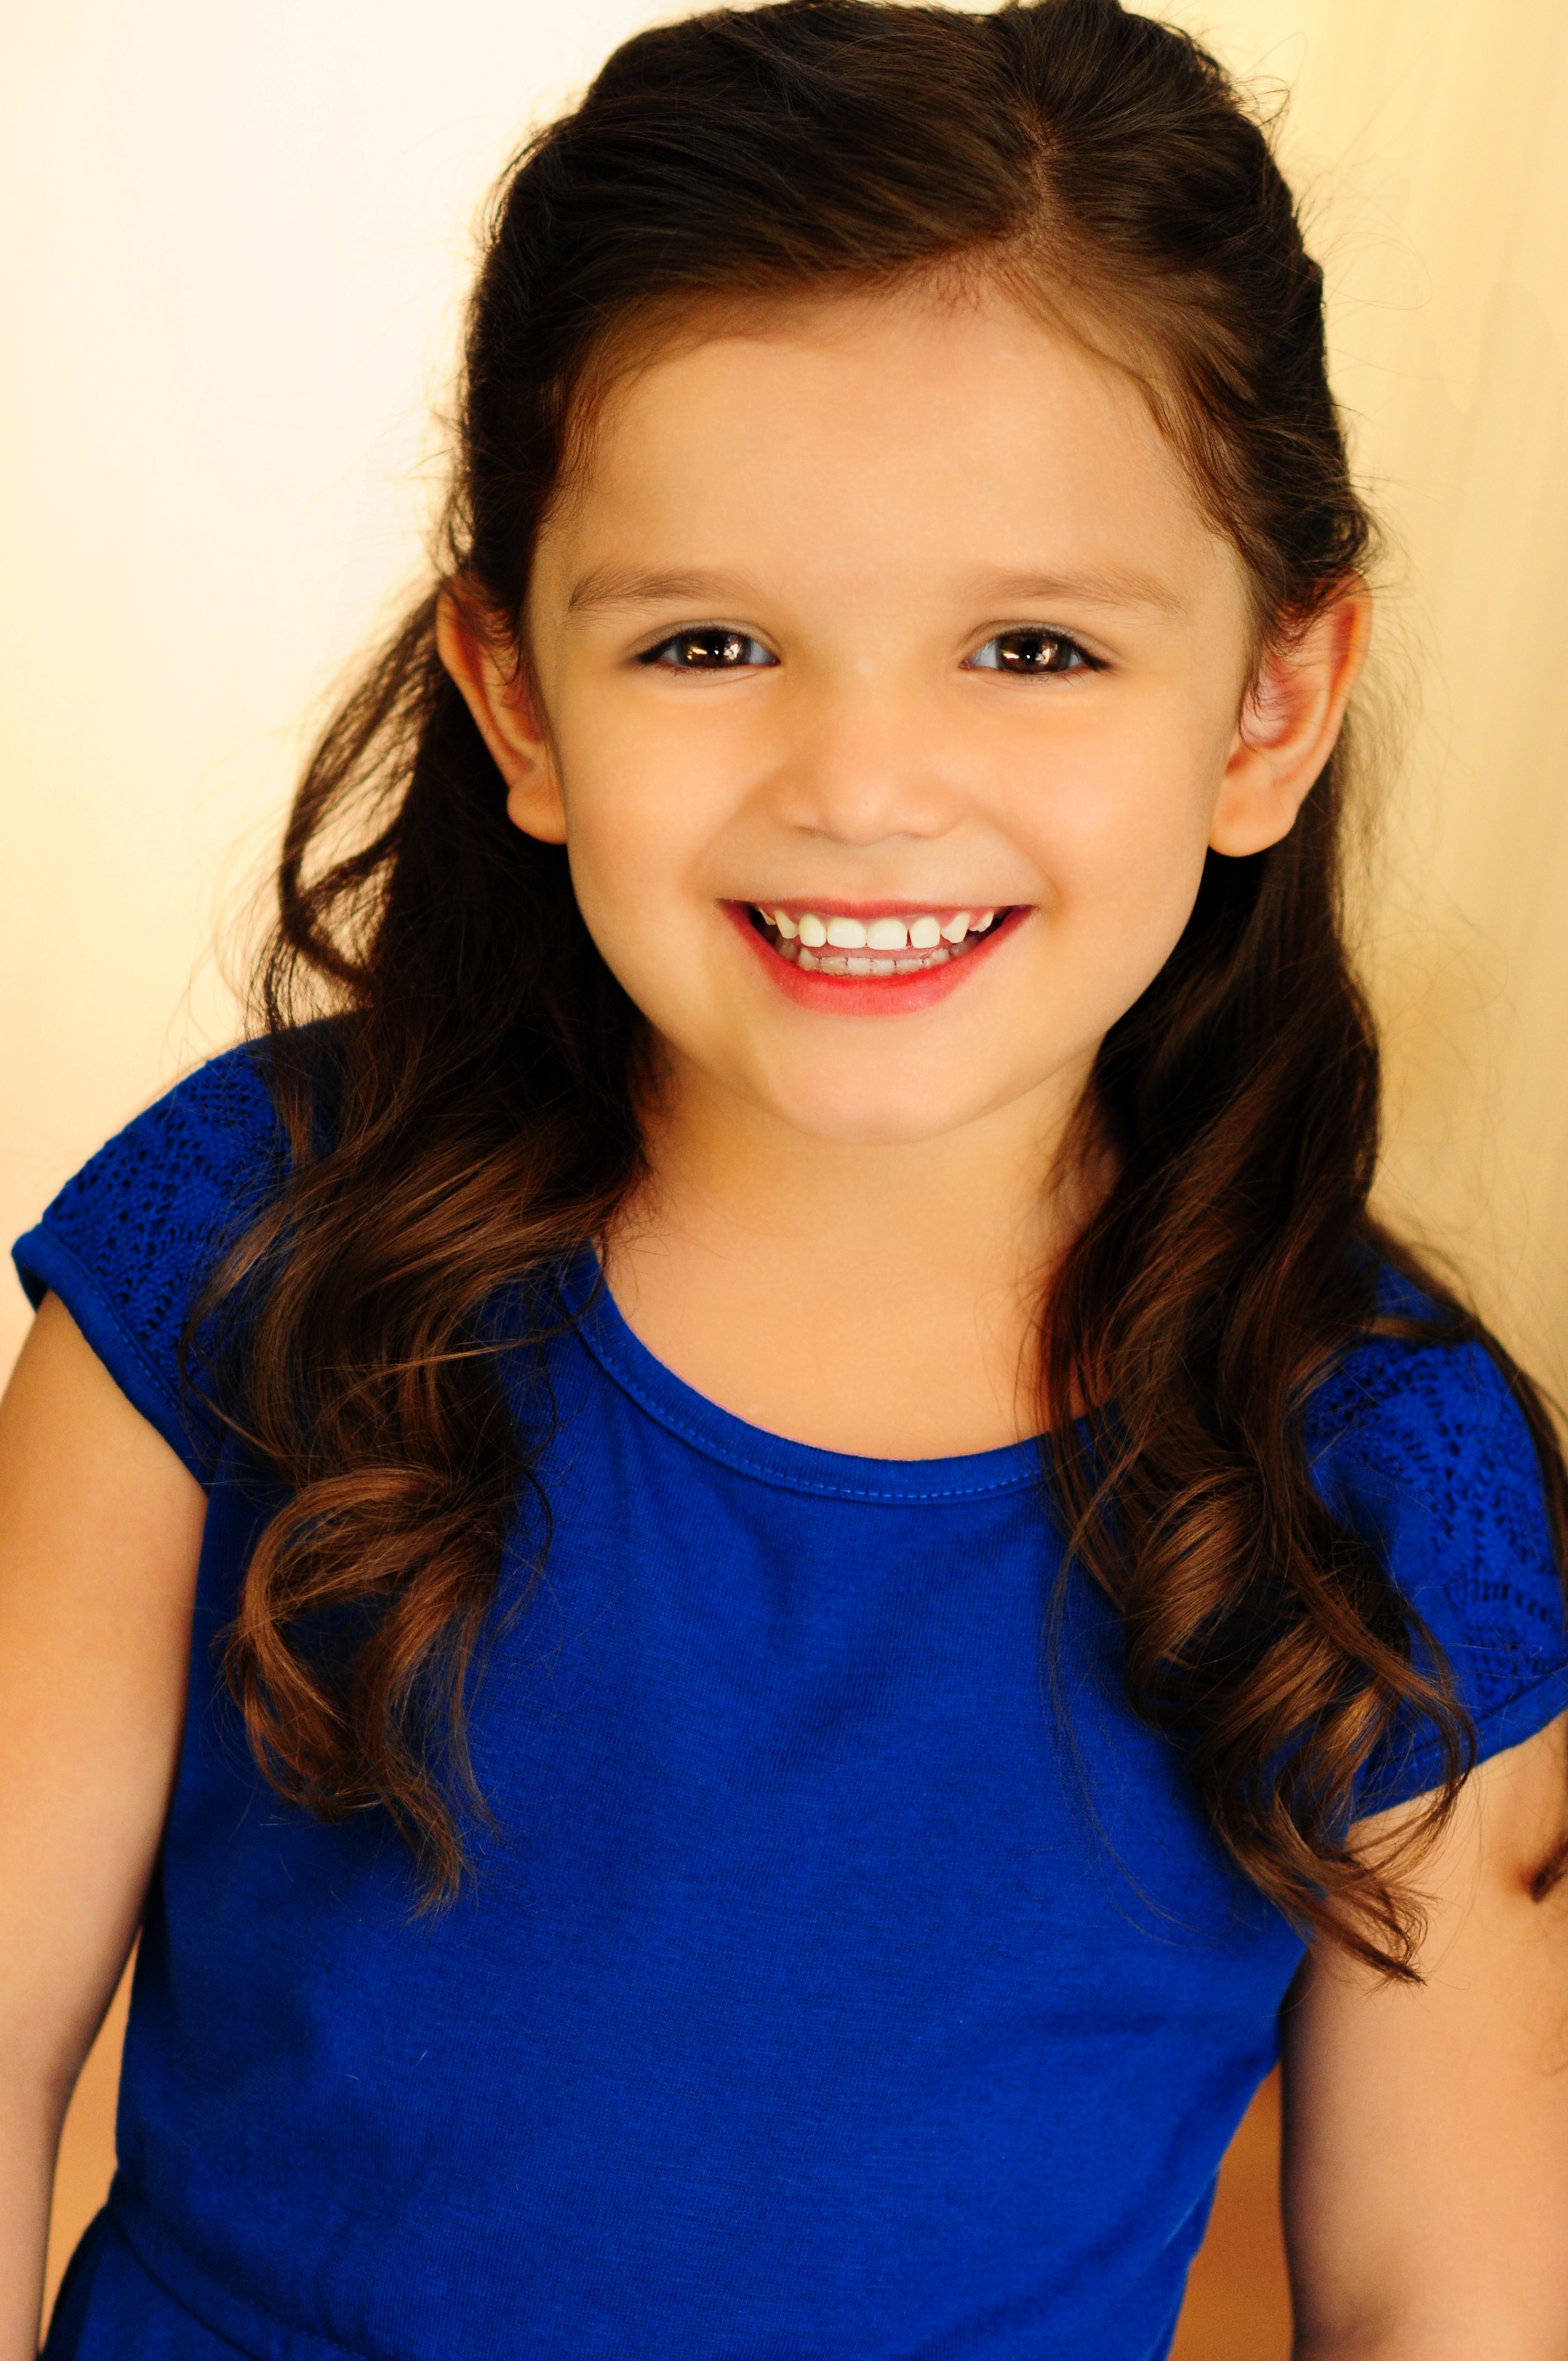 Bailey Elizabeth is a 6 year old Actress/Singer/Dancer based in Los Angeles, CA